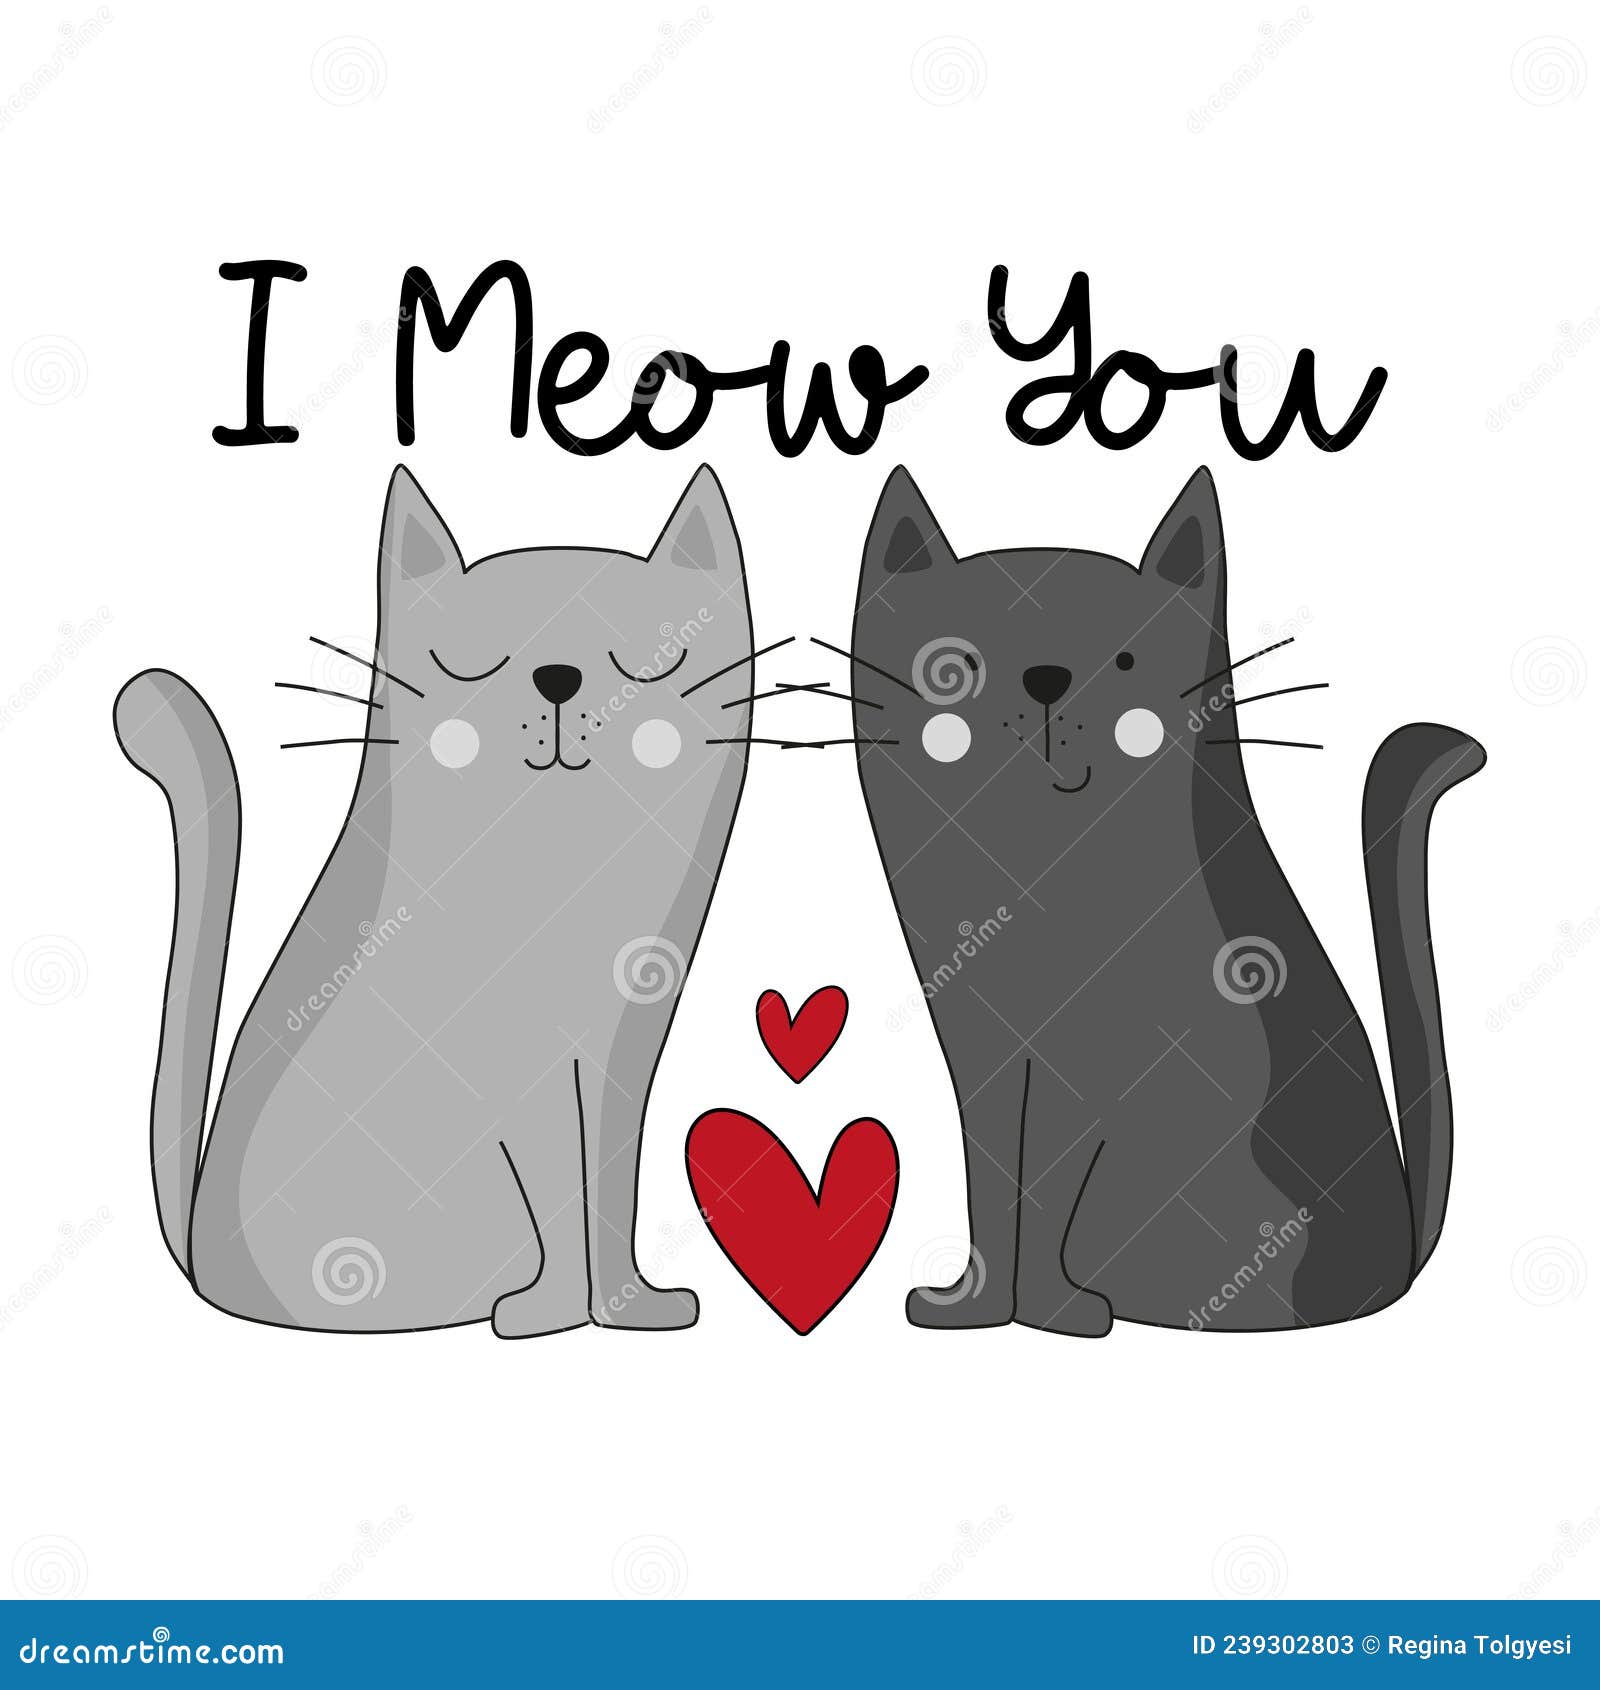 I Meow You - Cute Hand Drawn Cats with Hearts Stock Vector ...